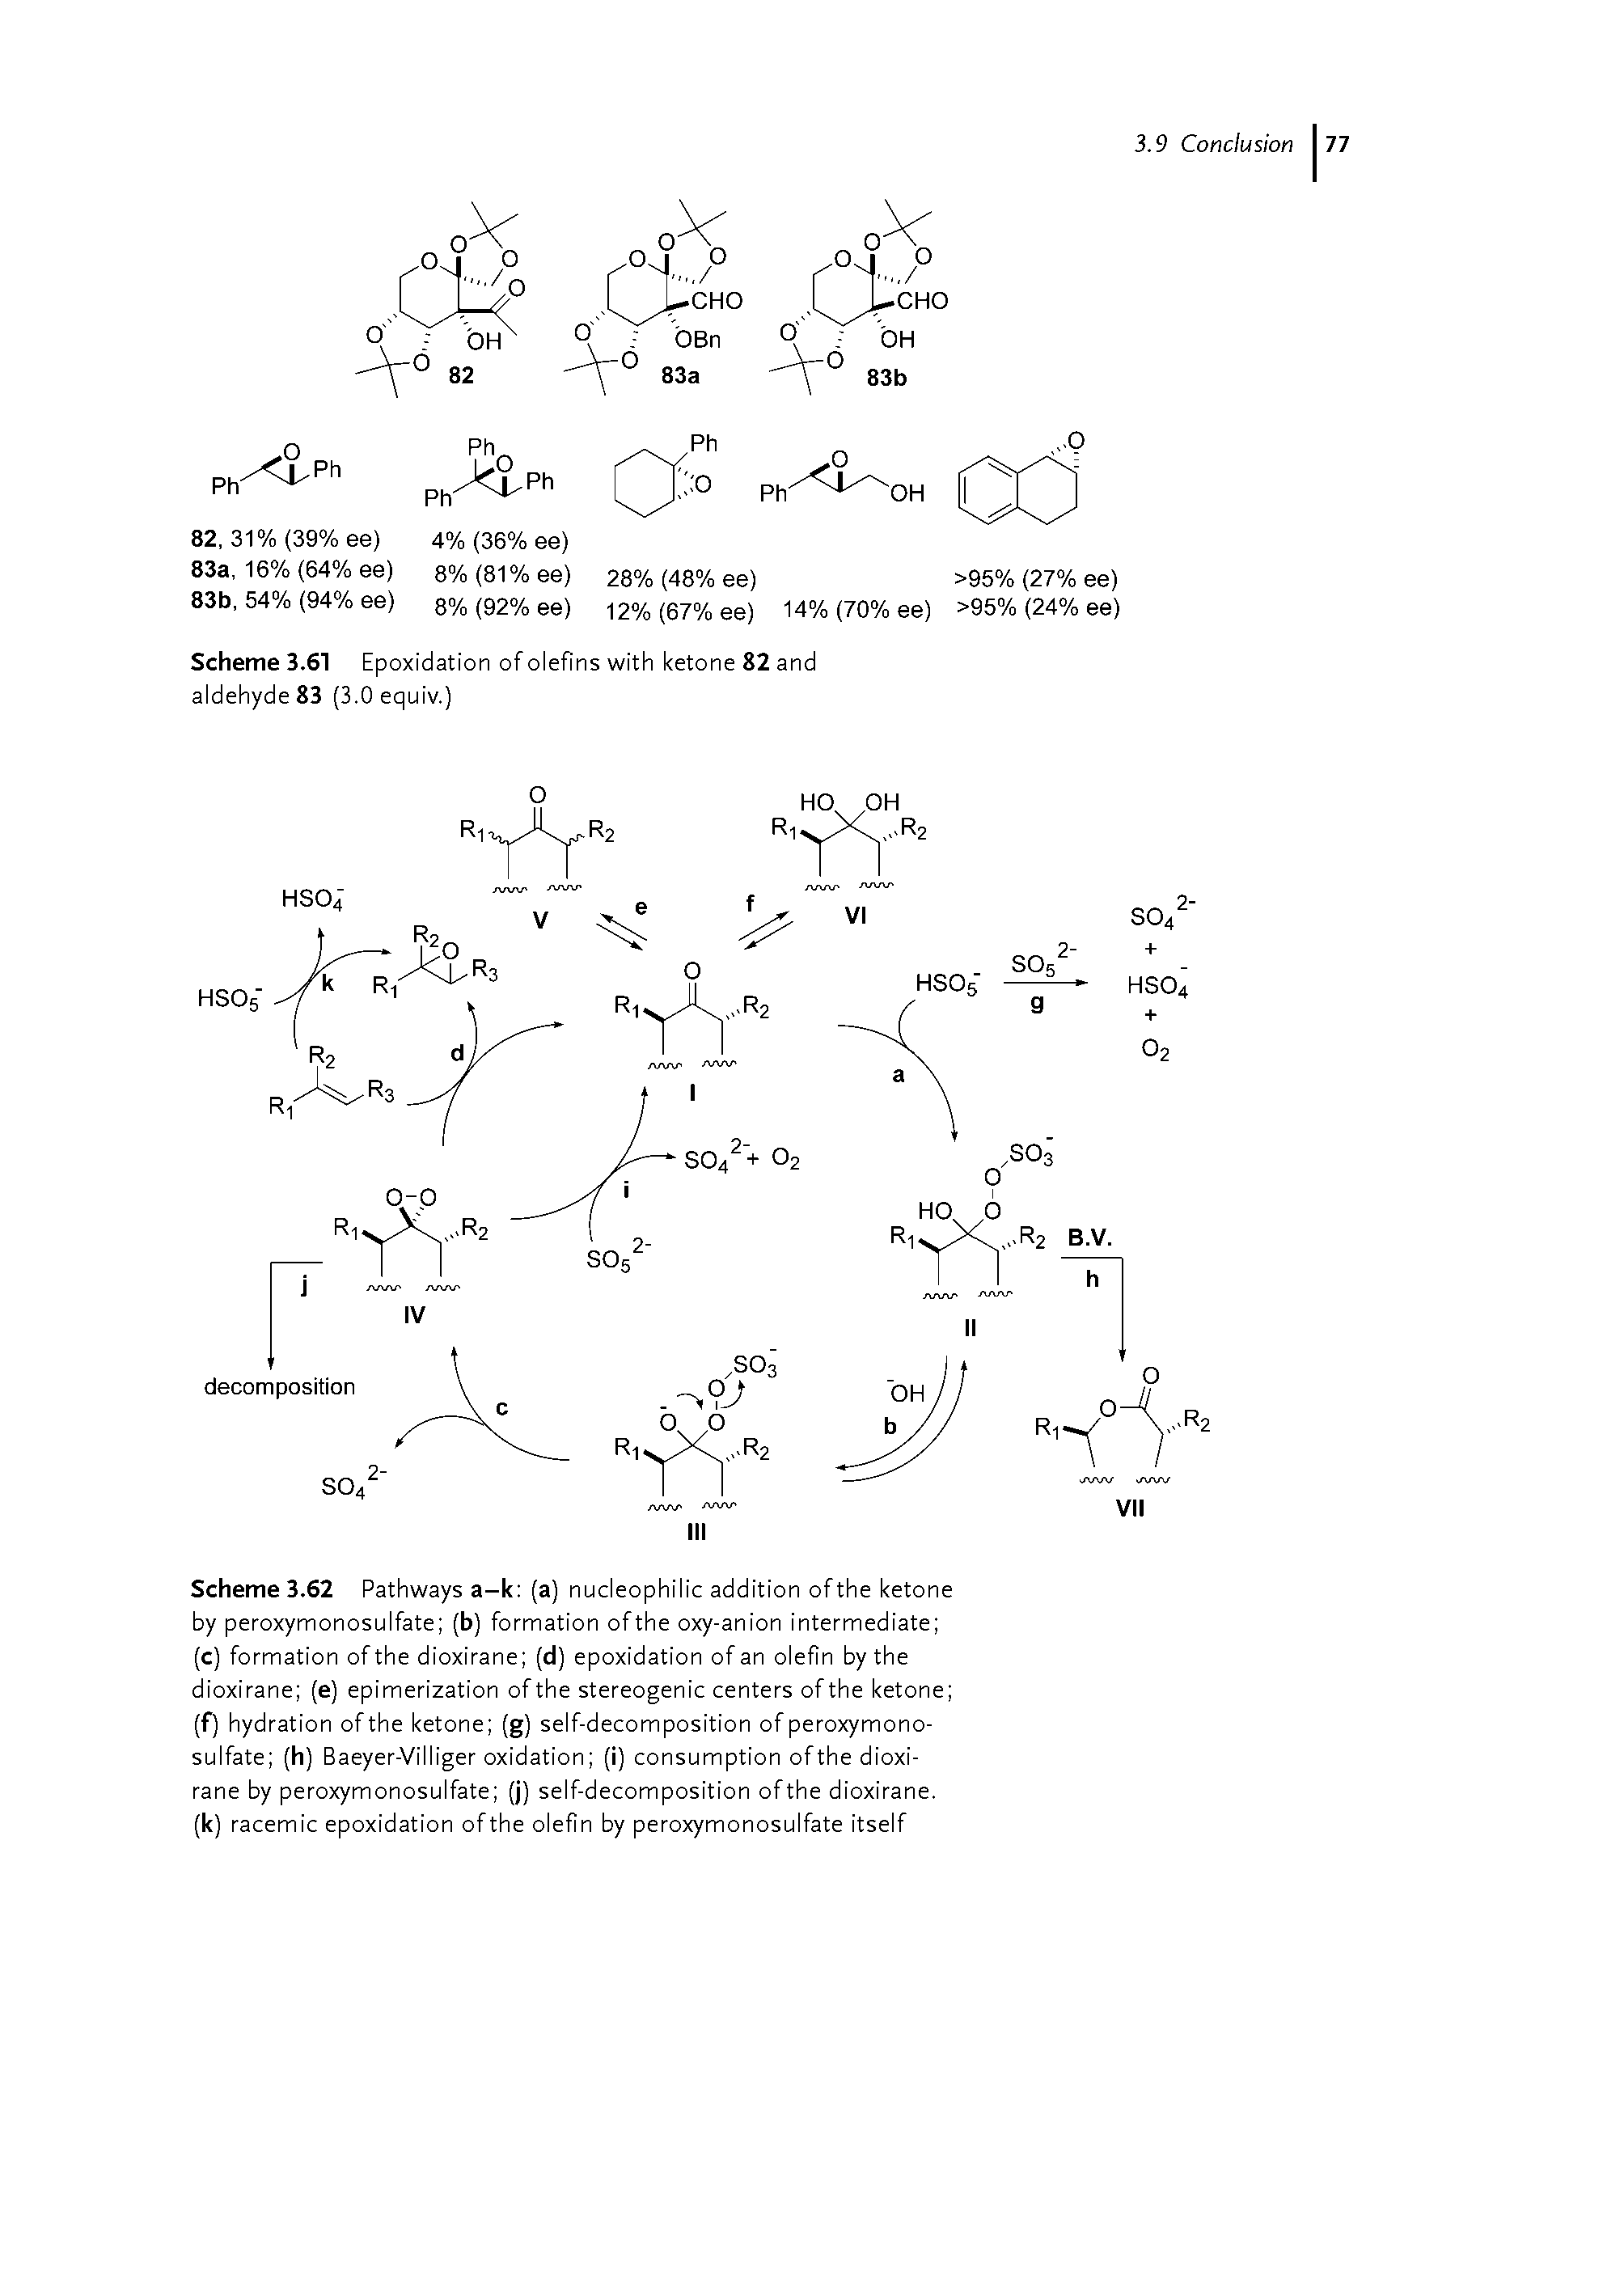 Scheme 3.62 Pathways a-k (a) nucleophilic addition of the ketone by peroxymonosulfate (b) formation ofthe oxy-anion intermediate (c) formation of the dioxirane (d) epoxidation of an olefin by the dioxirane (e) epimerization of the stereogenic centers of the ketone (f) hydration of the ketone (g) self-decomposition of peroxymonosulfate (h) Baeyer-Villiger oxidation (i) consumption of the dioxirane by peroxymonosulfate (j) self-decomposition ofthe dioxirane. (k) racemic epoxidation of the olefin by peroxymonosulfate itself...